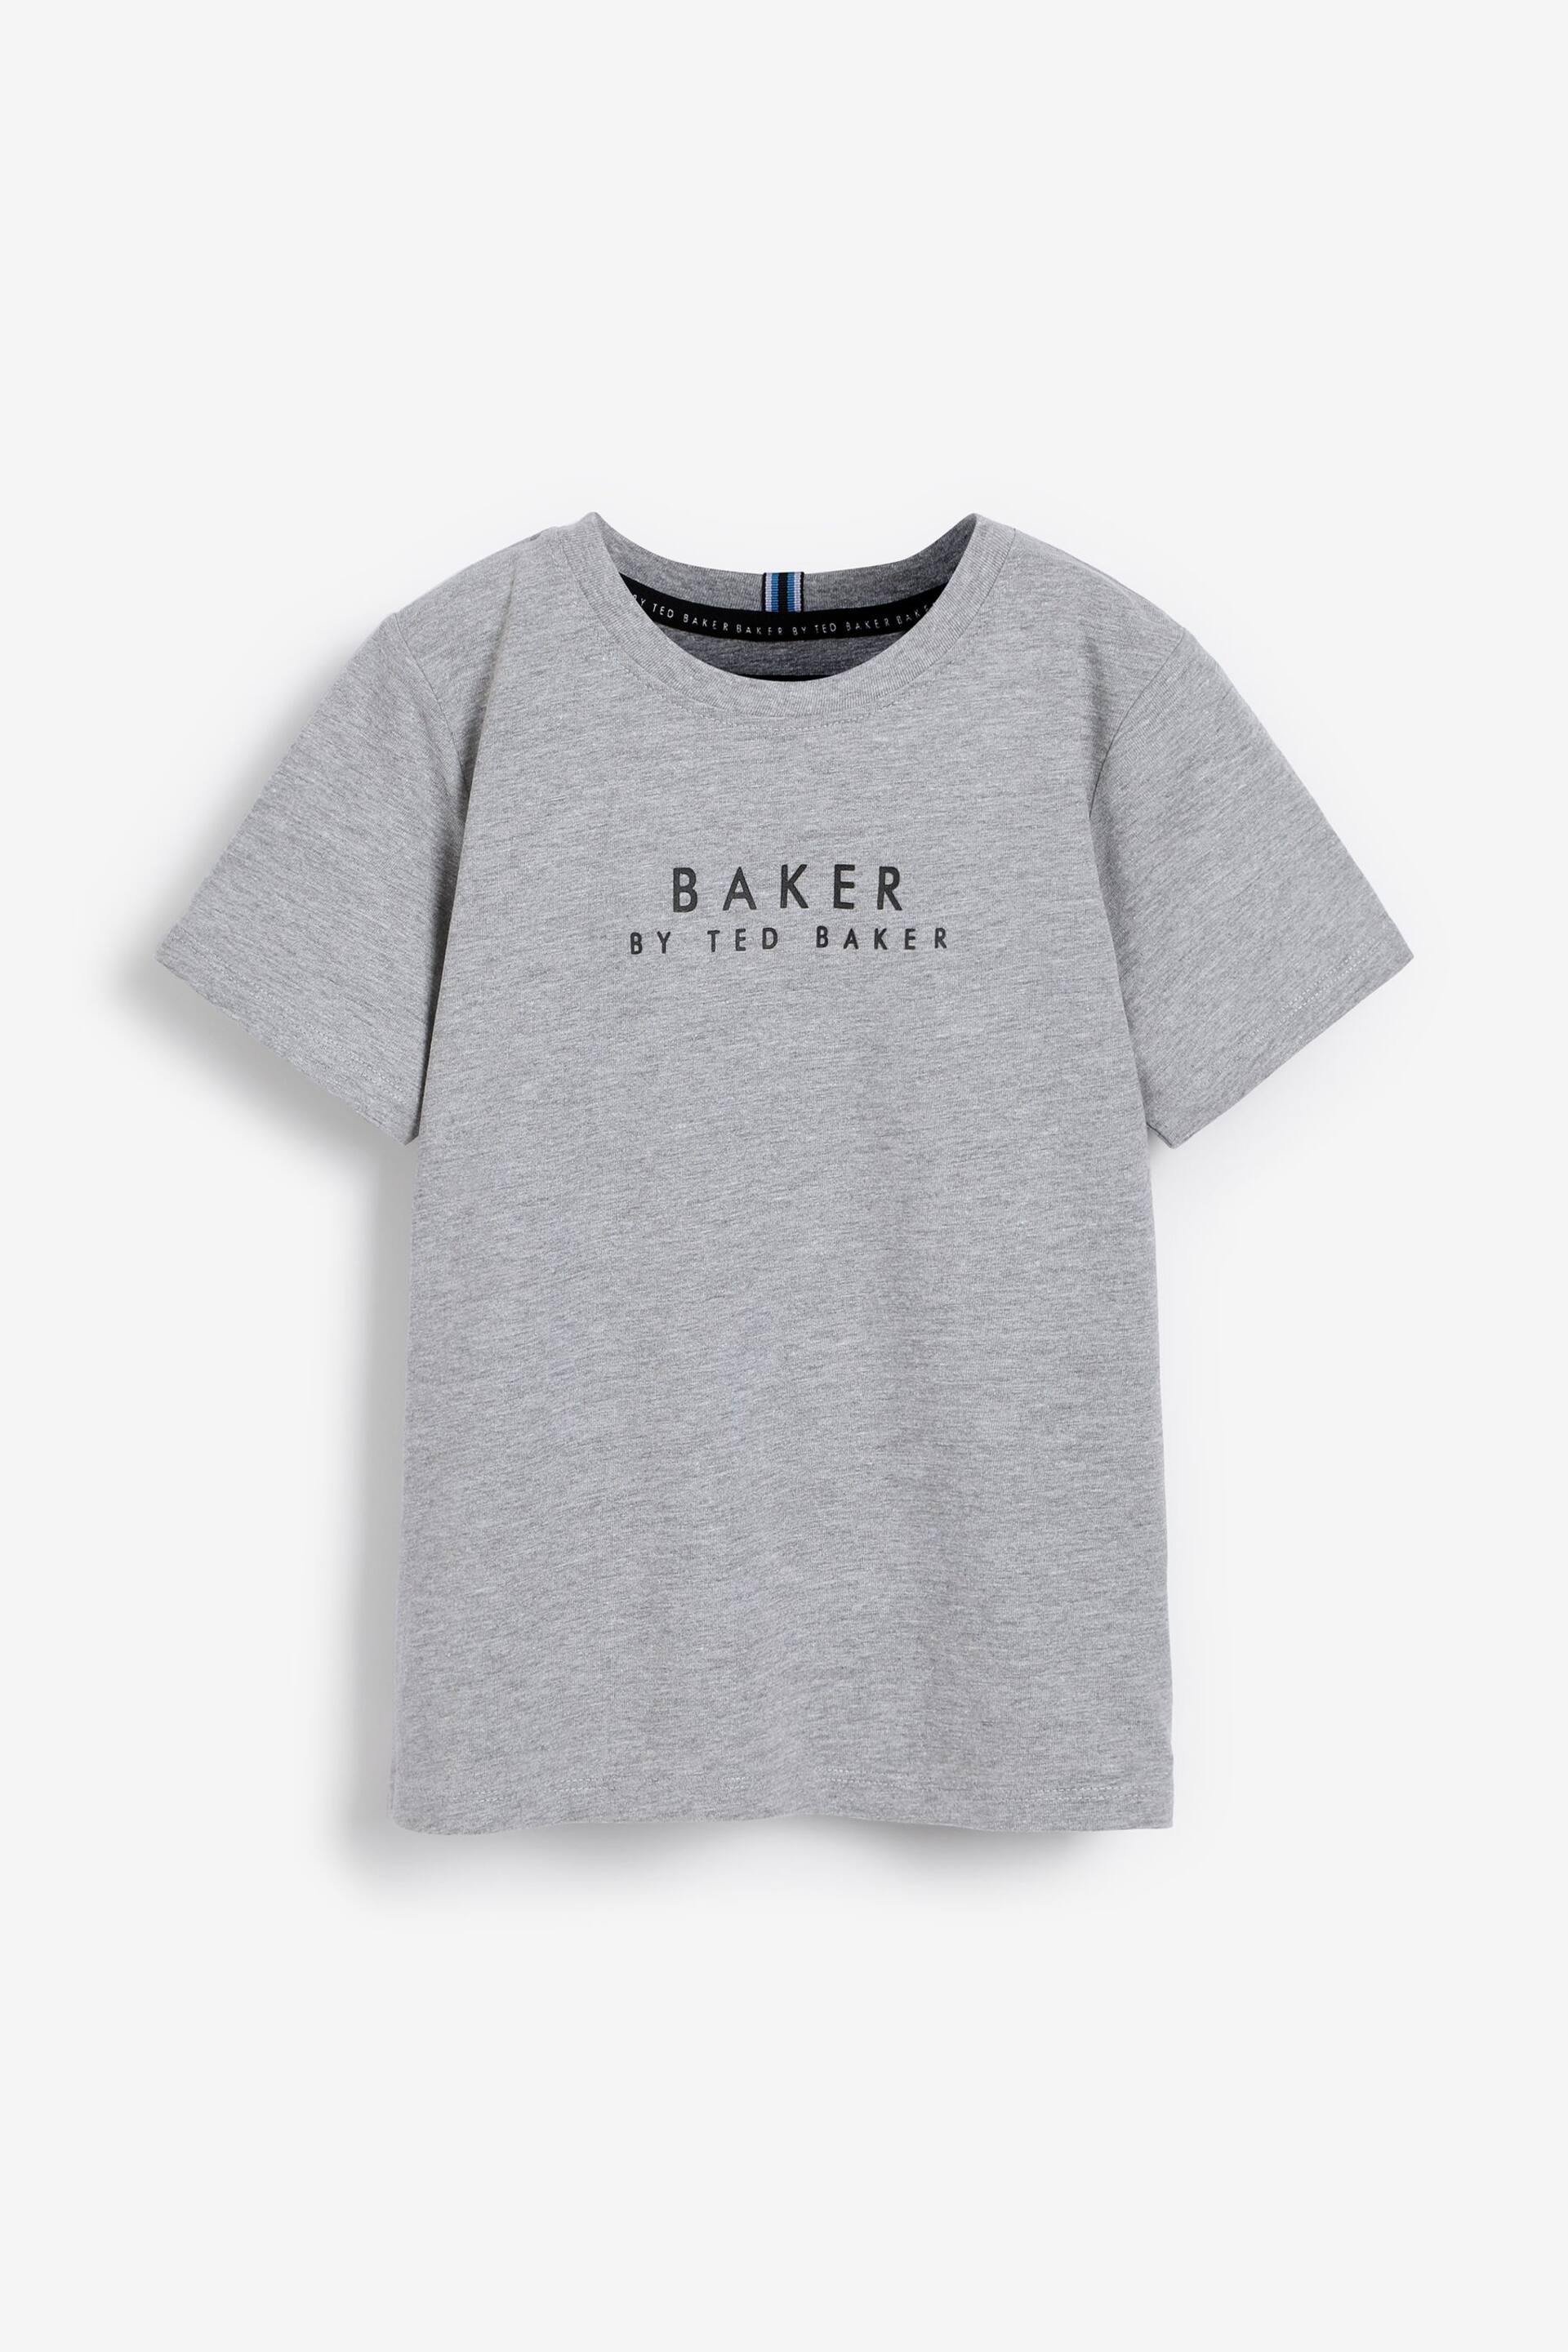 Baker by Ted Baker T-Shirt - Image 3 of 5